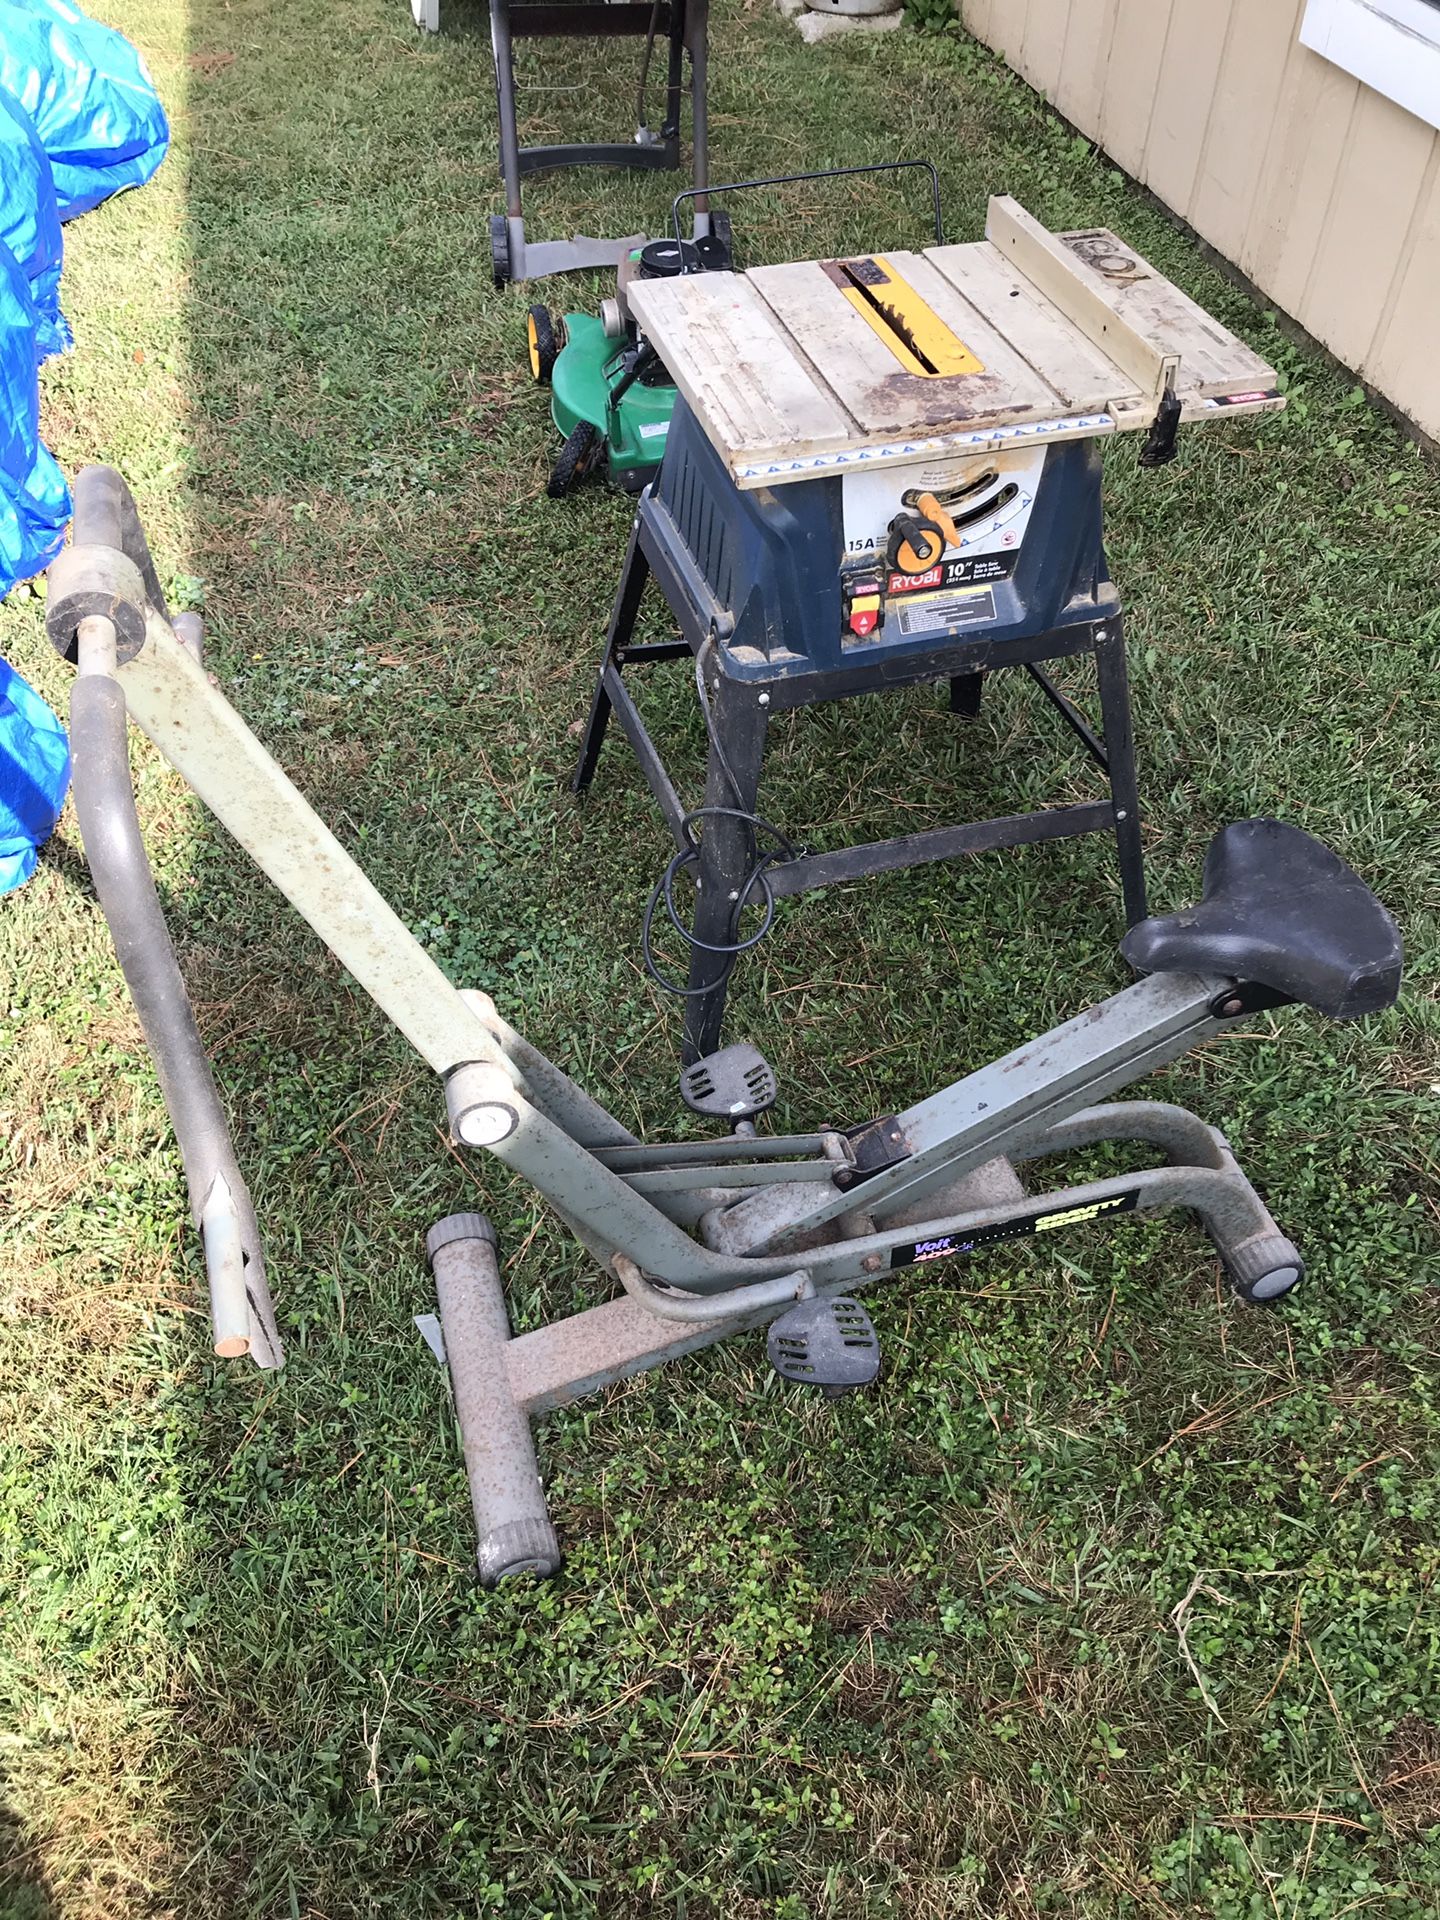 Free mower, grill, glider & table saw for scrap/ parts or refurbishment